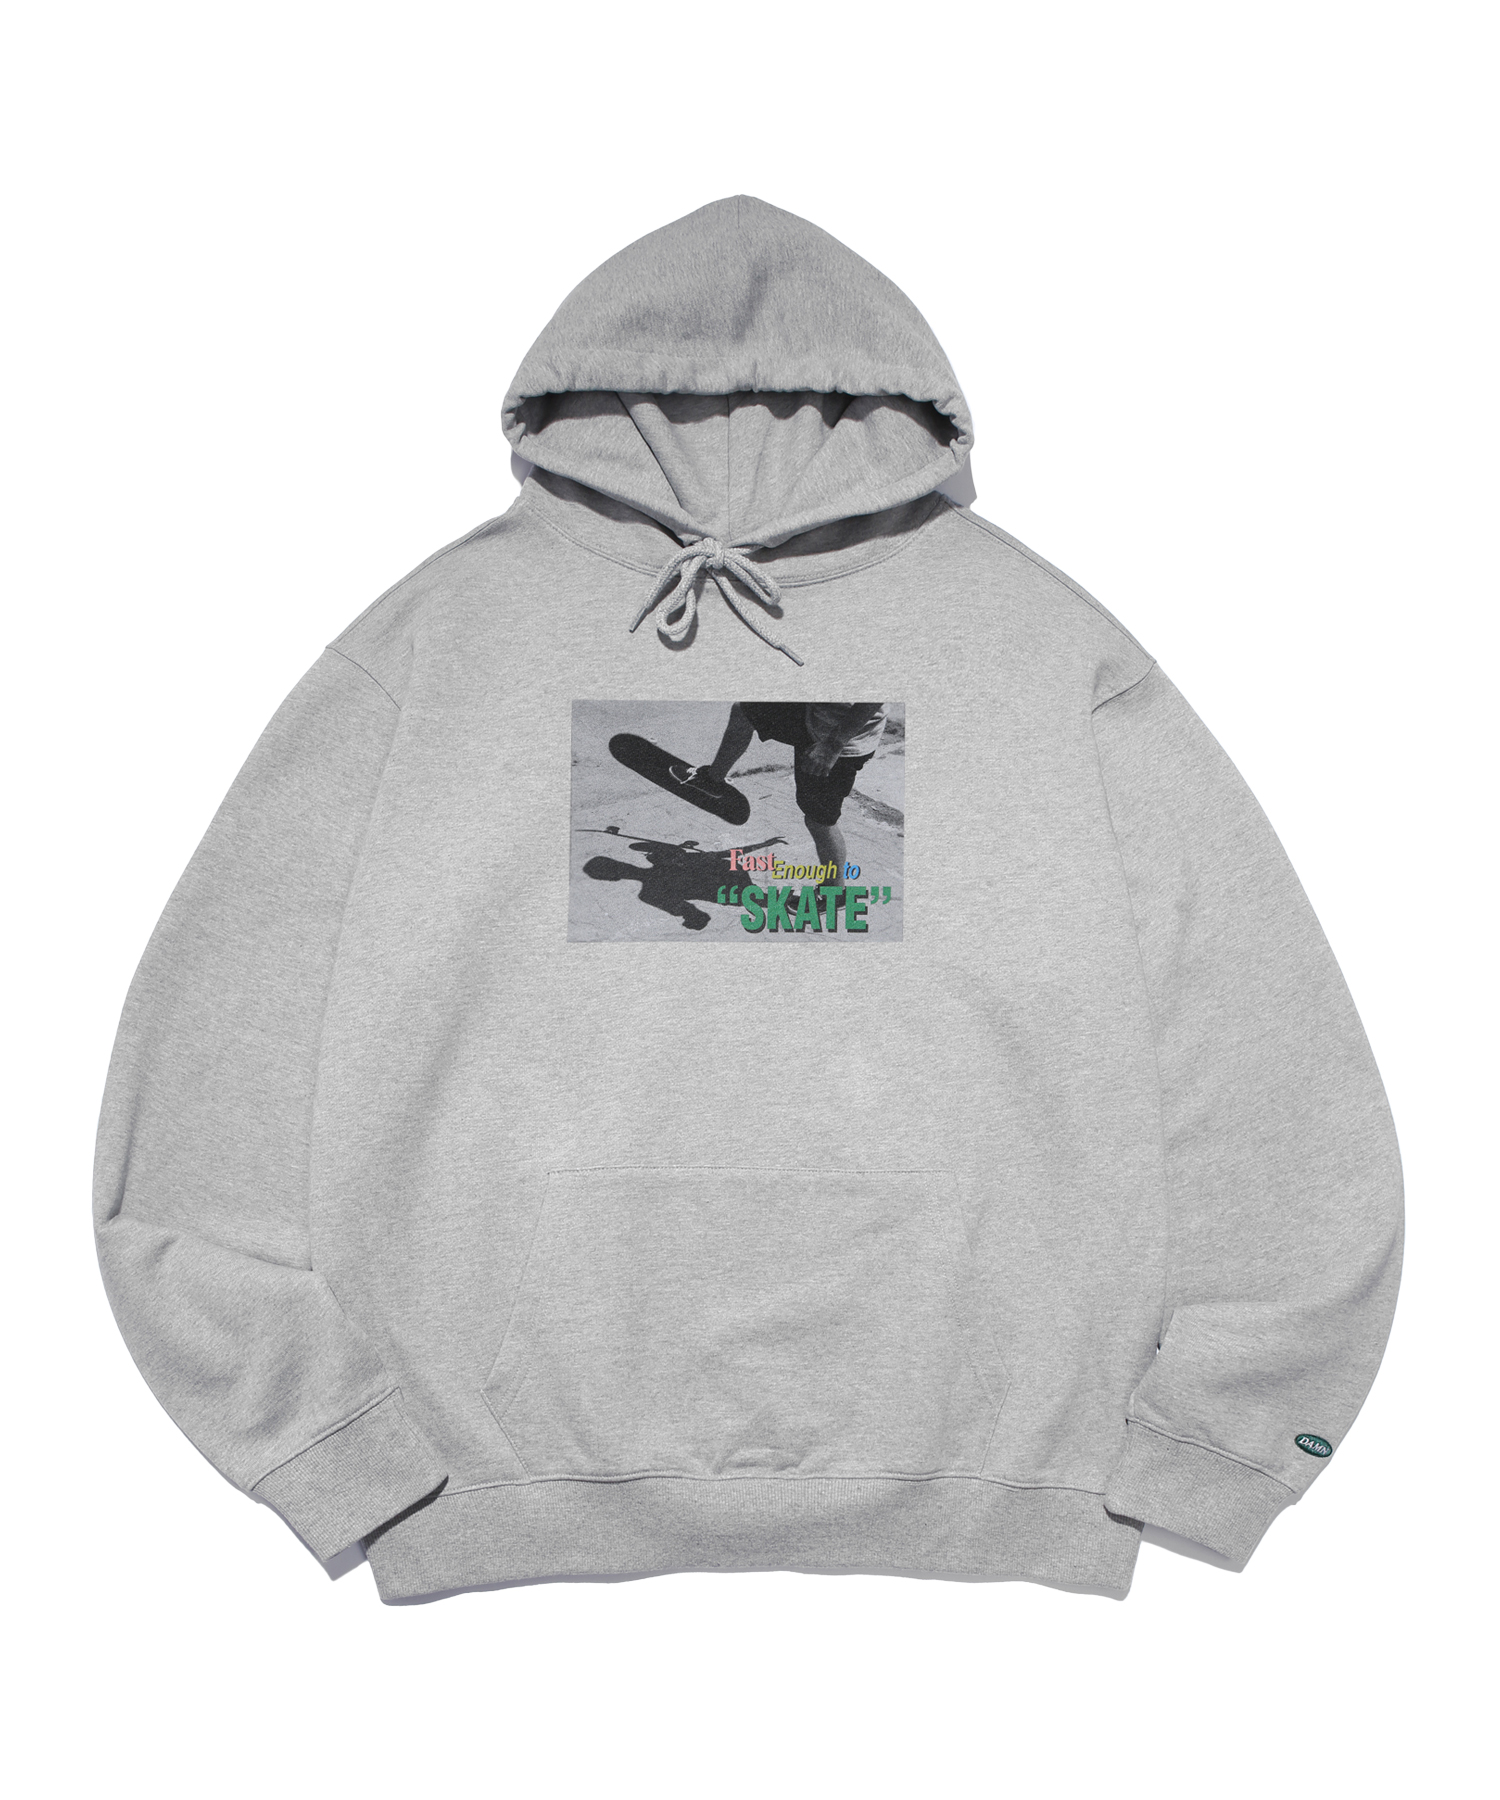 THE SMELL OF US SKATE HOODIE GRAY